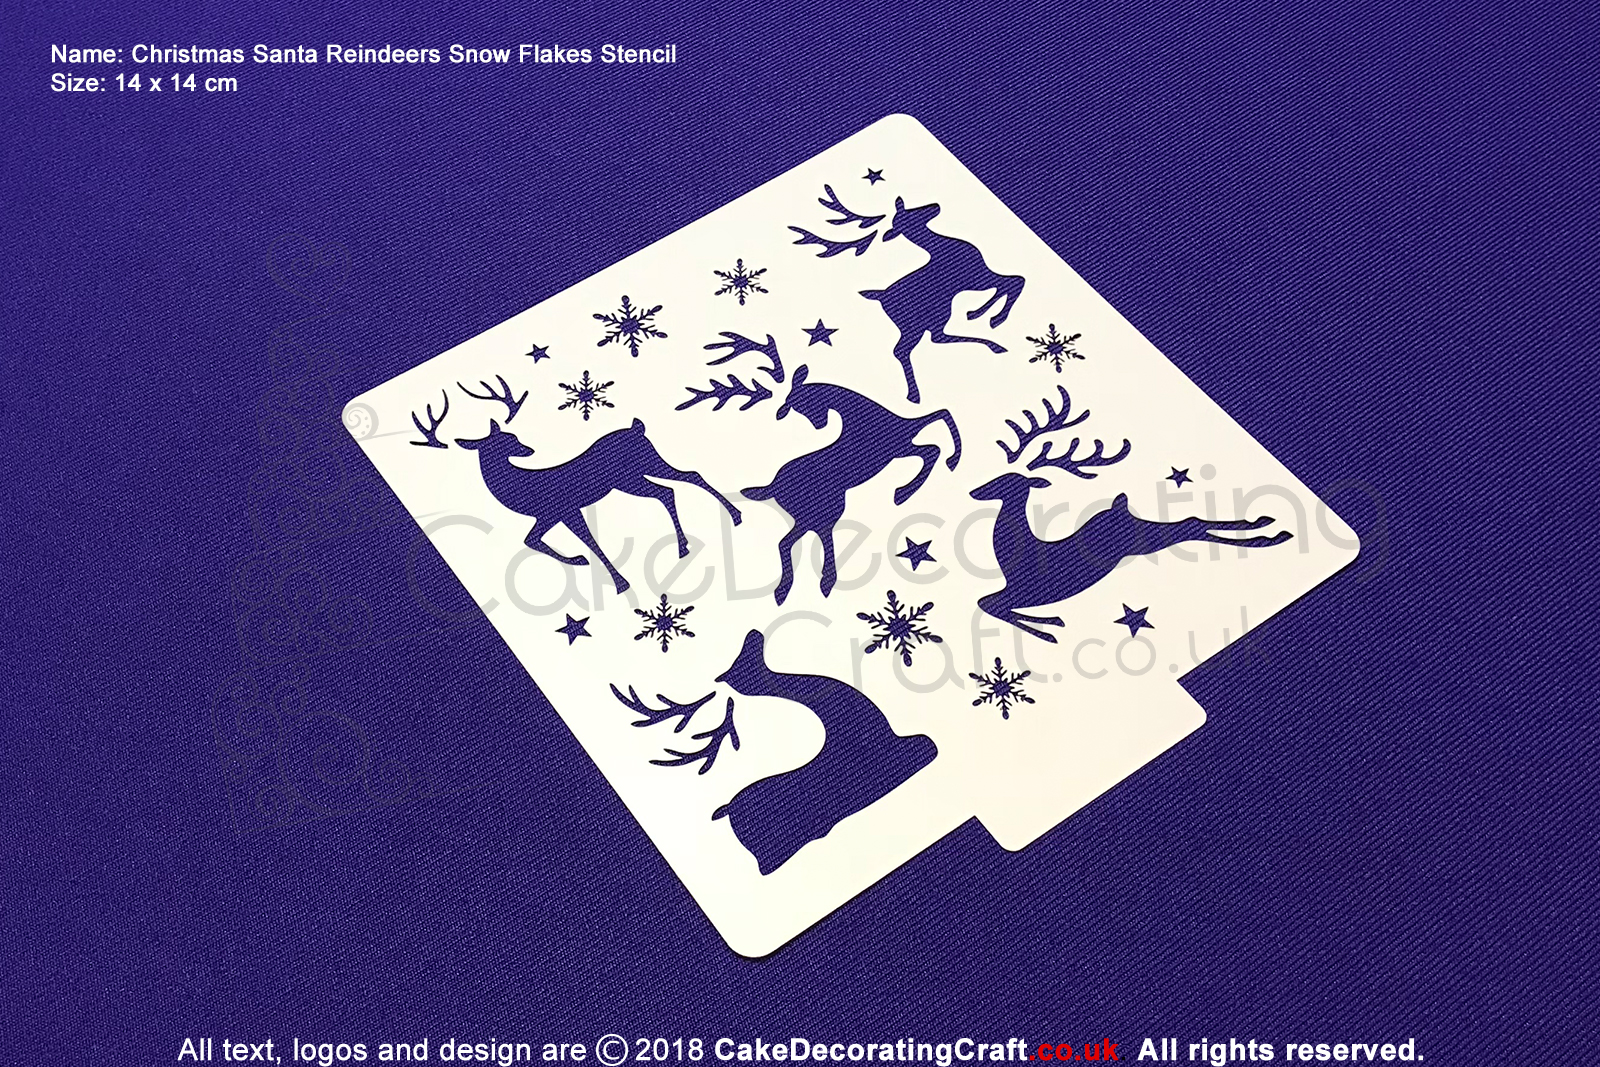 Christmas Santa Reindeers Snow Flakes Stencil | Air Brush Stenciling | Cake and Cupcake Decorating Craft Tool